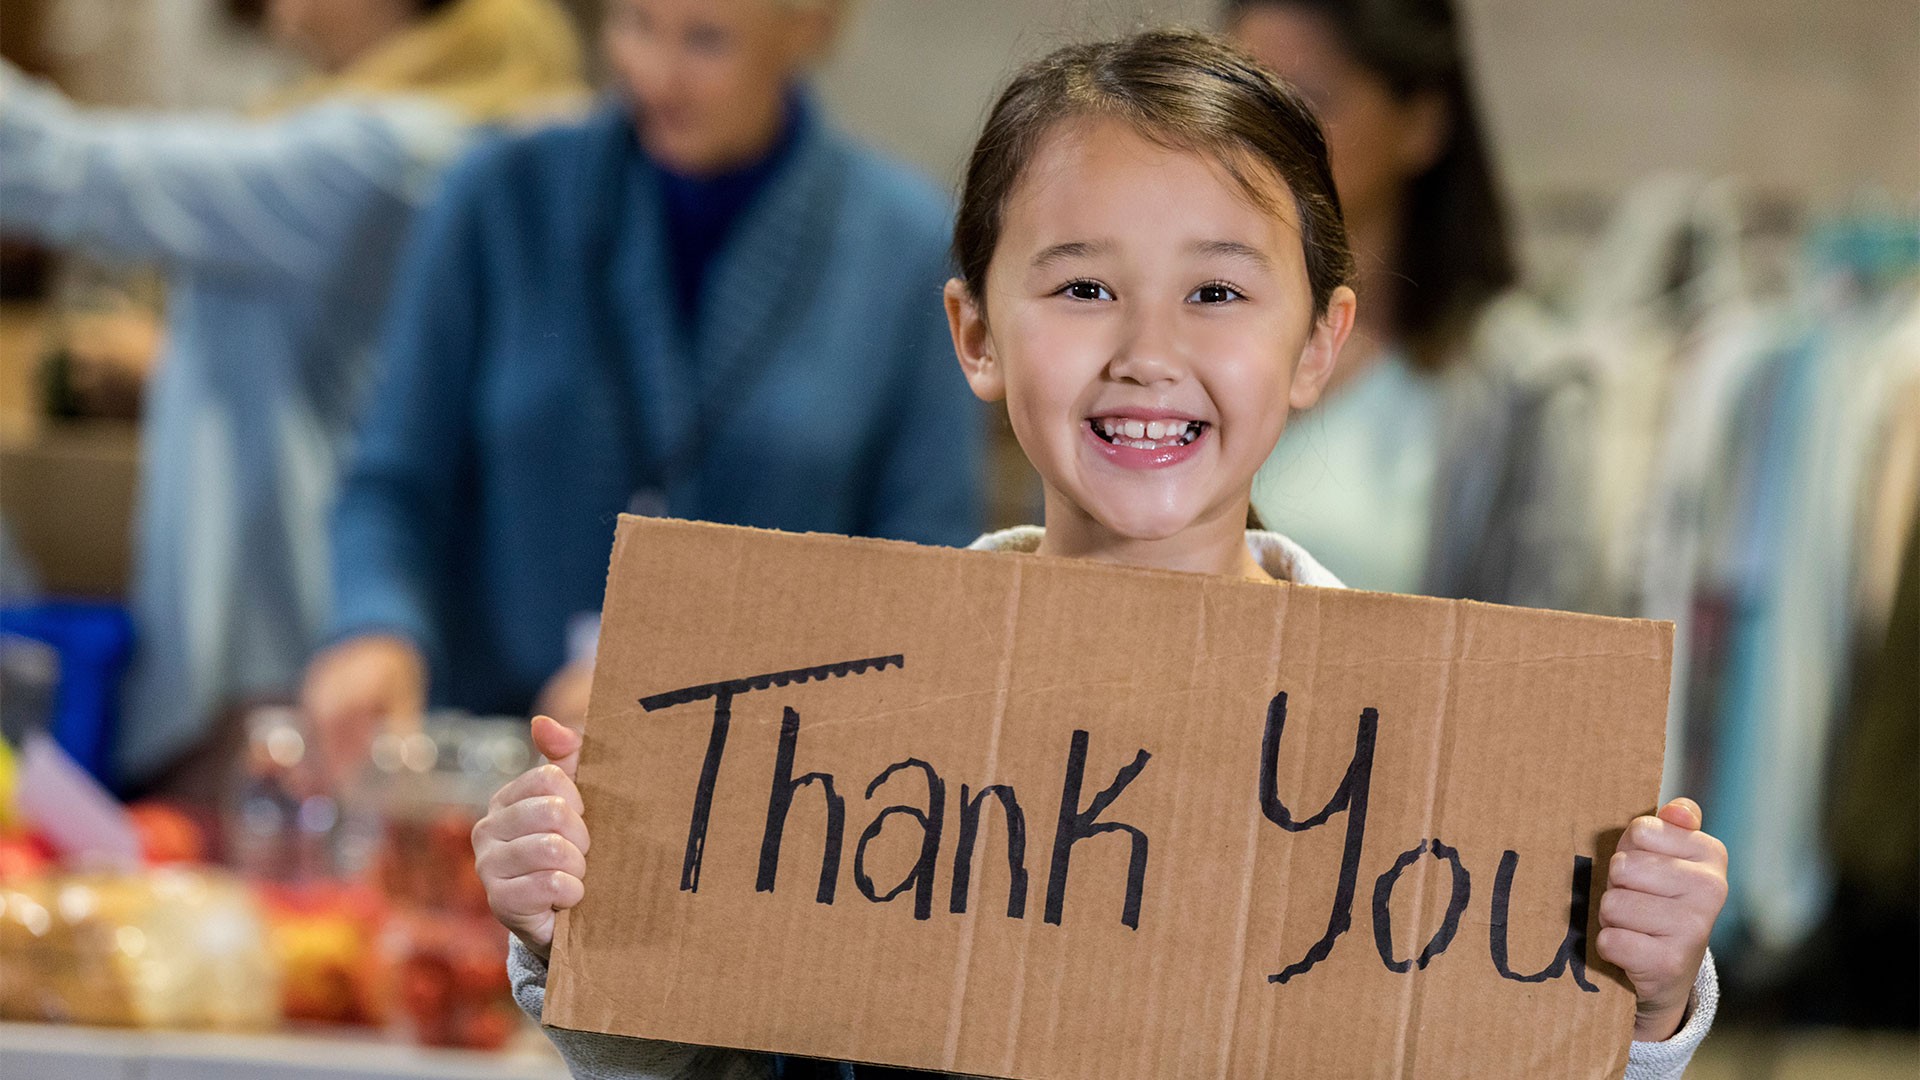 Little girl with thank you sign in a food bank